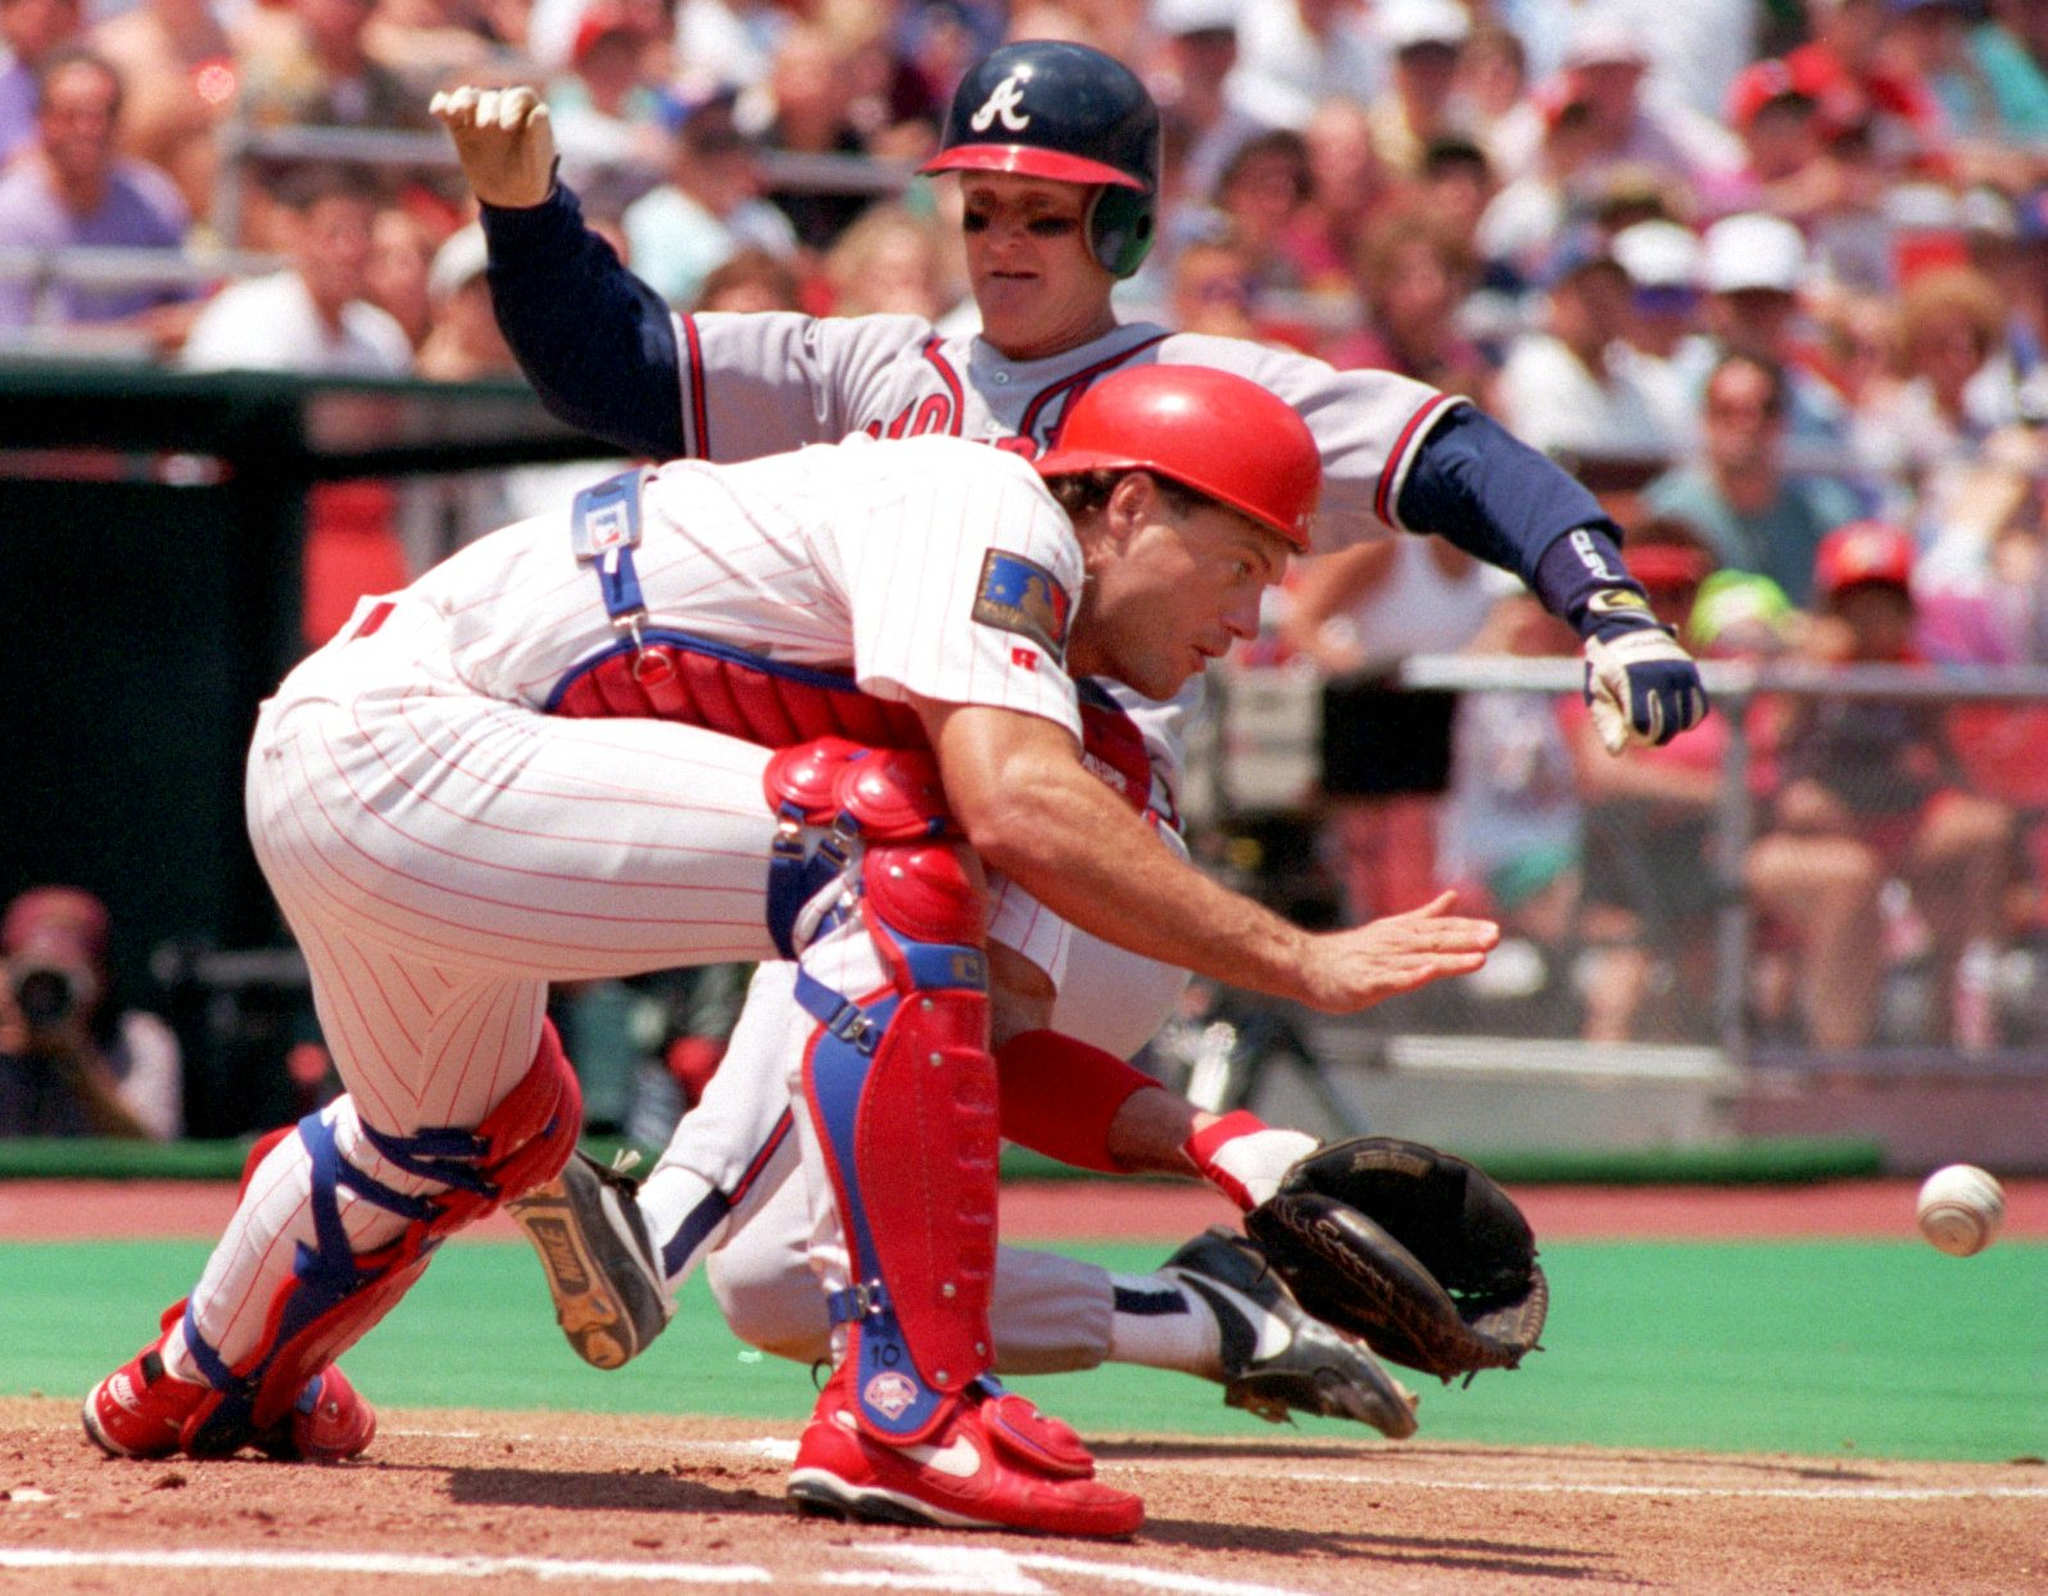 Darren Daulton - A Player I Couldn't Stand, But Learned to Really